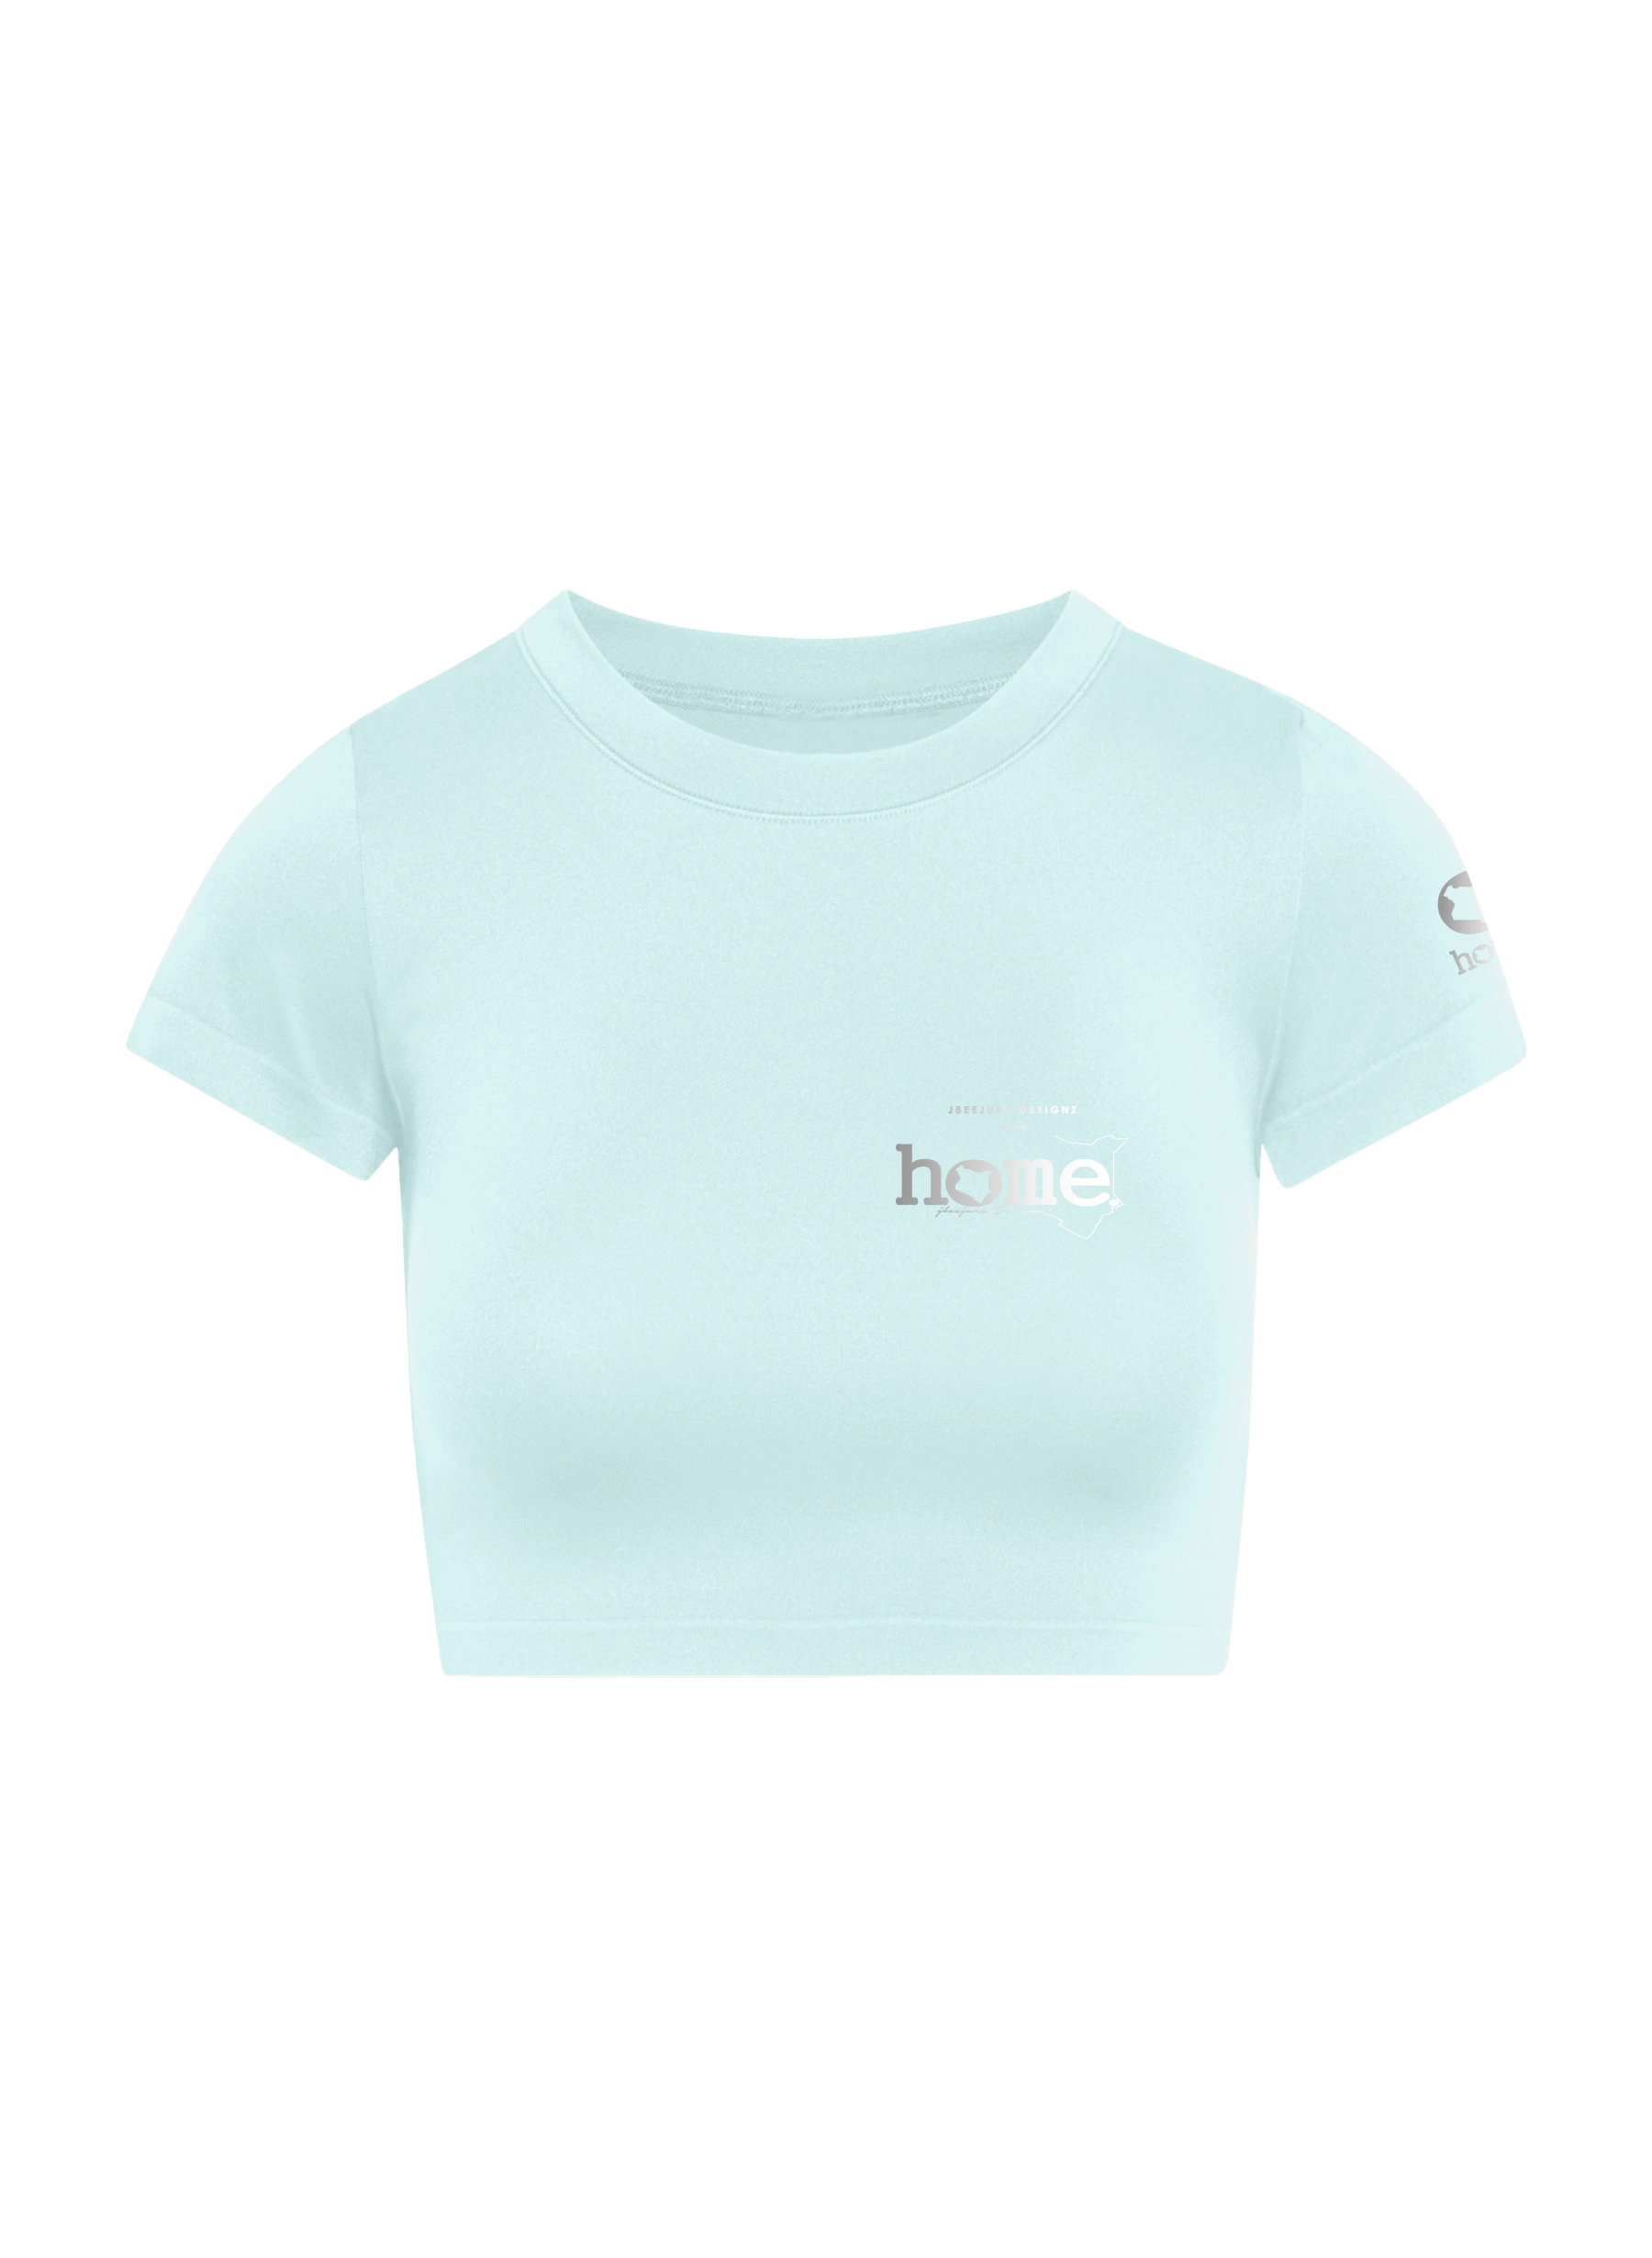 home_254 SHORT SLEEVED MISTY BLUE CROPPED ARIA TEE WITH A SILVER 3D WORDS PRINT – COTTON PLUS FABRIC